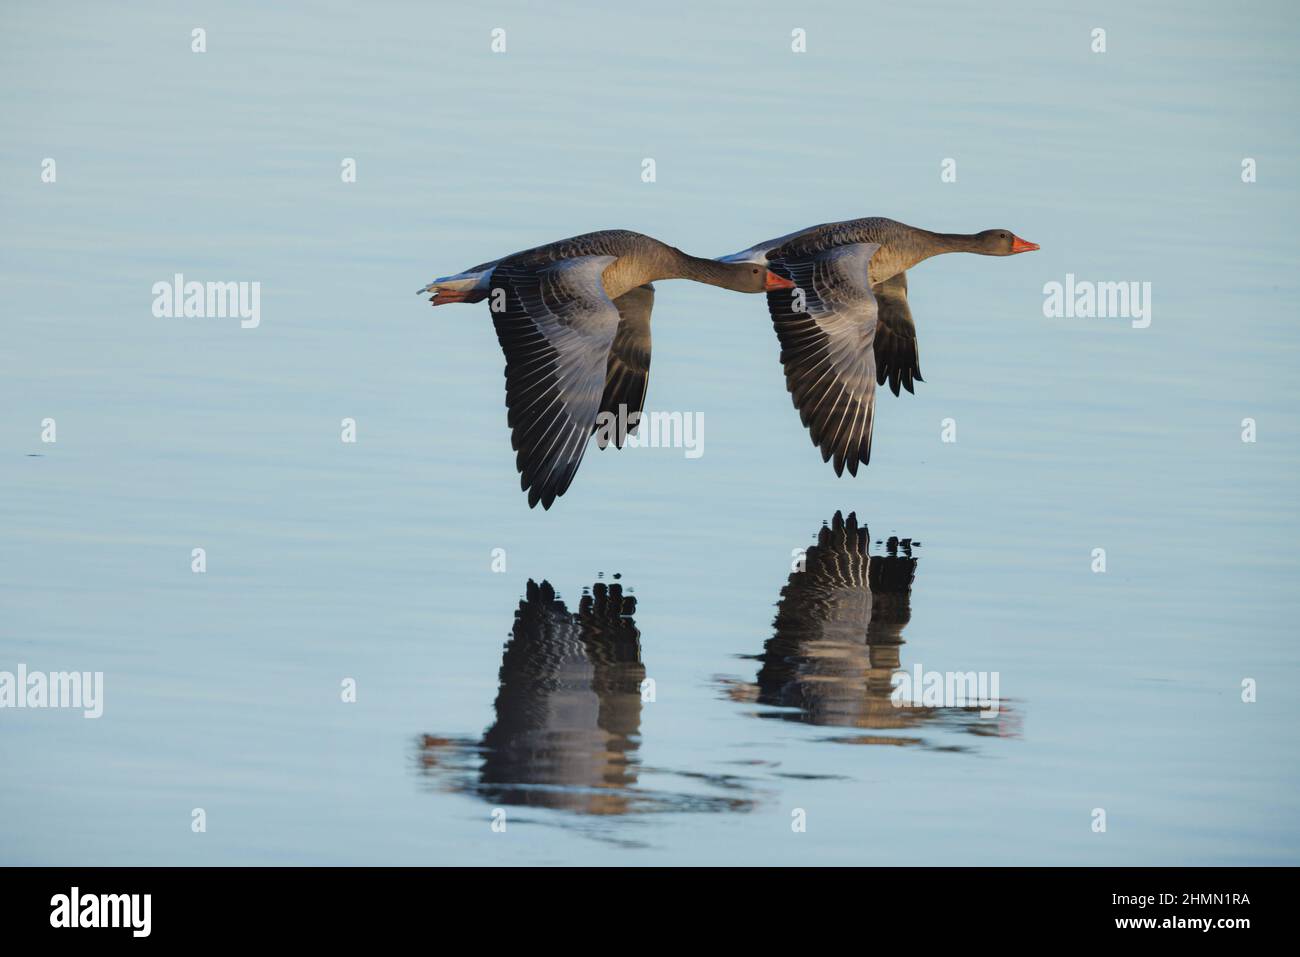 greylag goose (Anser anser), two greylag geese flying over a lake at dawn, reflection, Germany, Bavaria Stock Photo